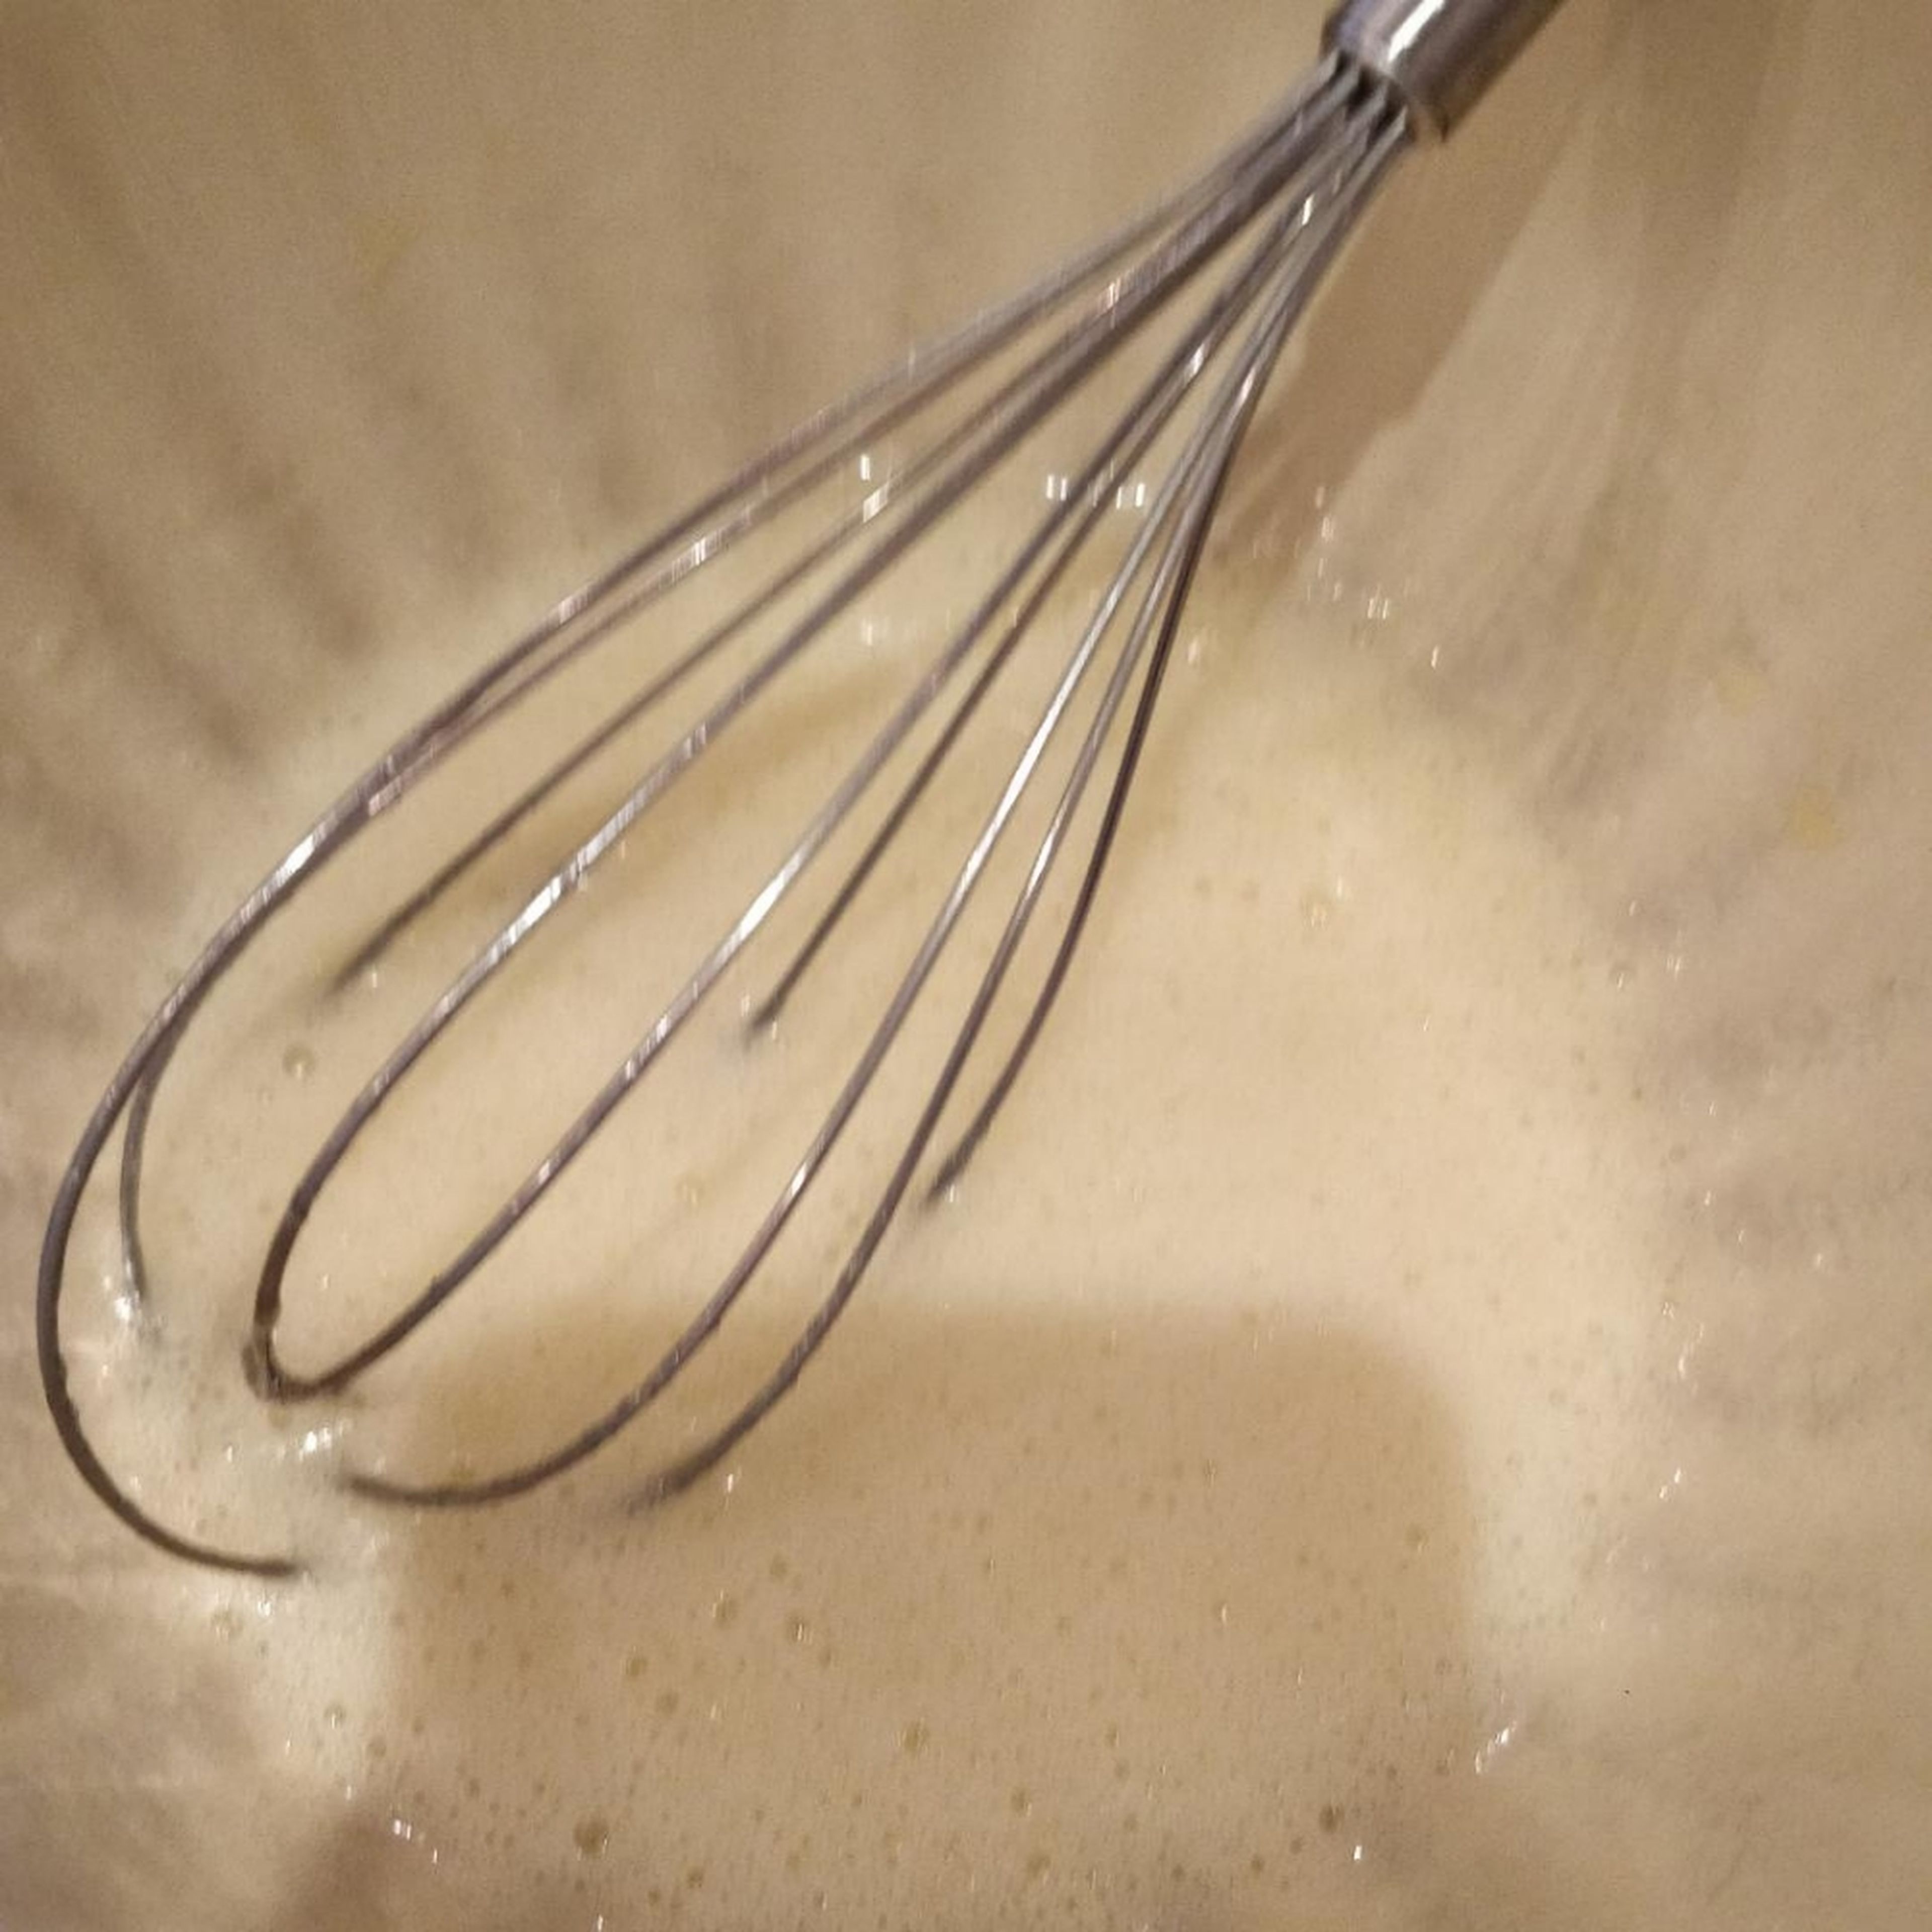 Whisk in the butter and sugar